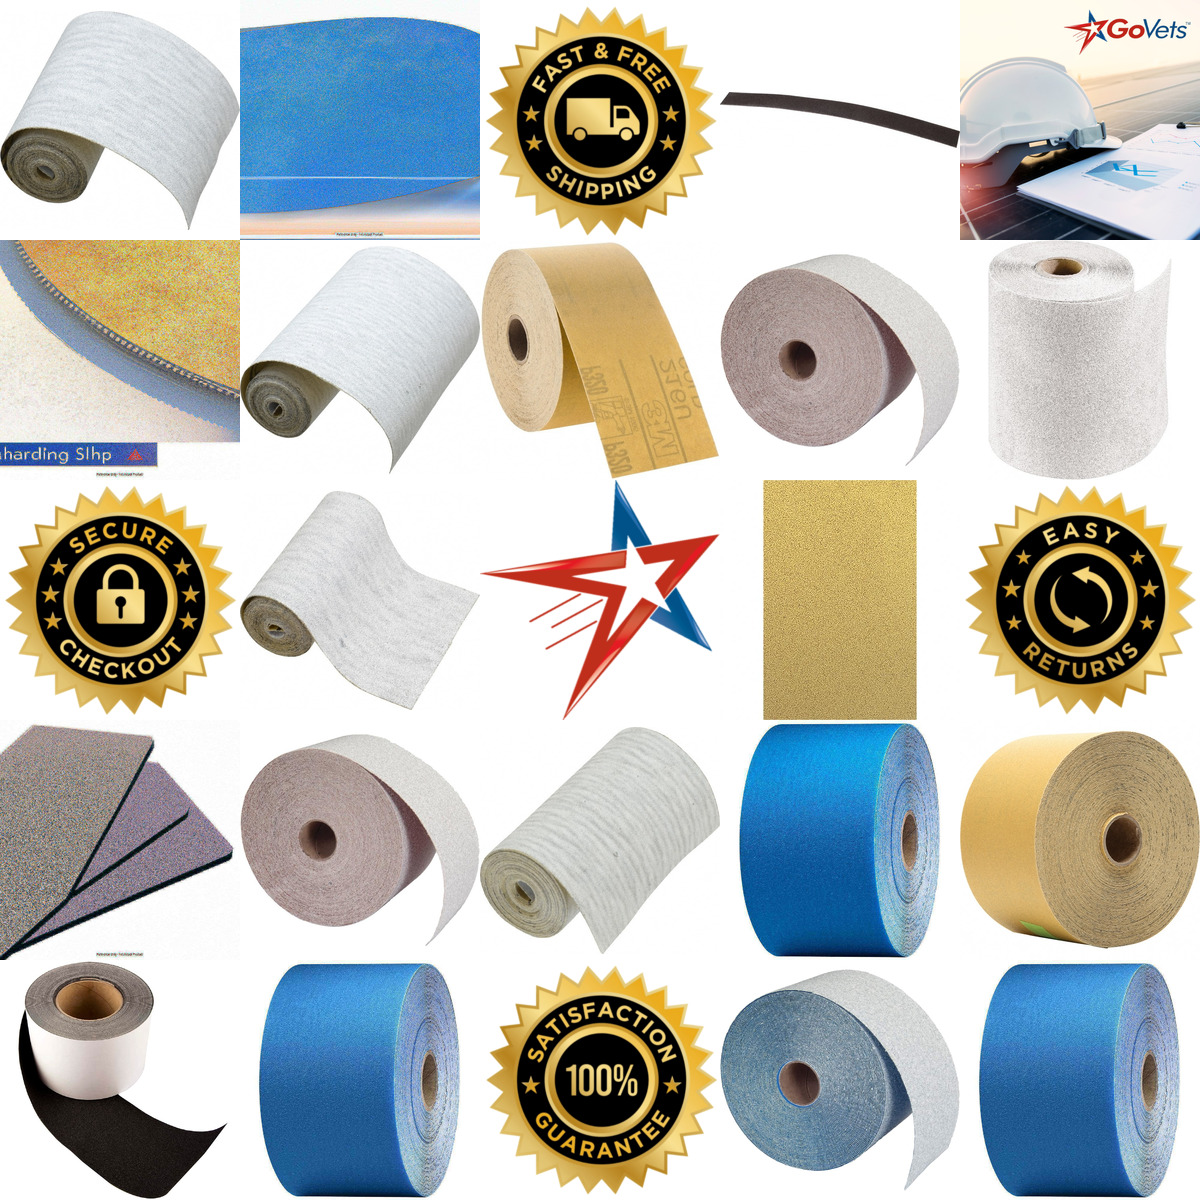 A selection of Adhesive Backed Sanding Sheets products on GoVets